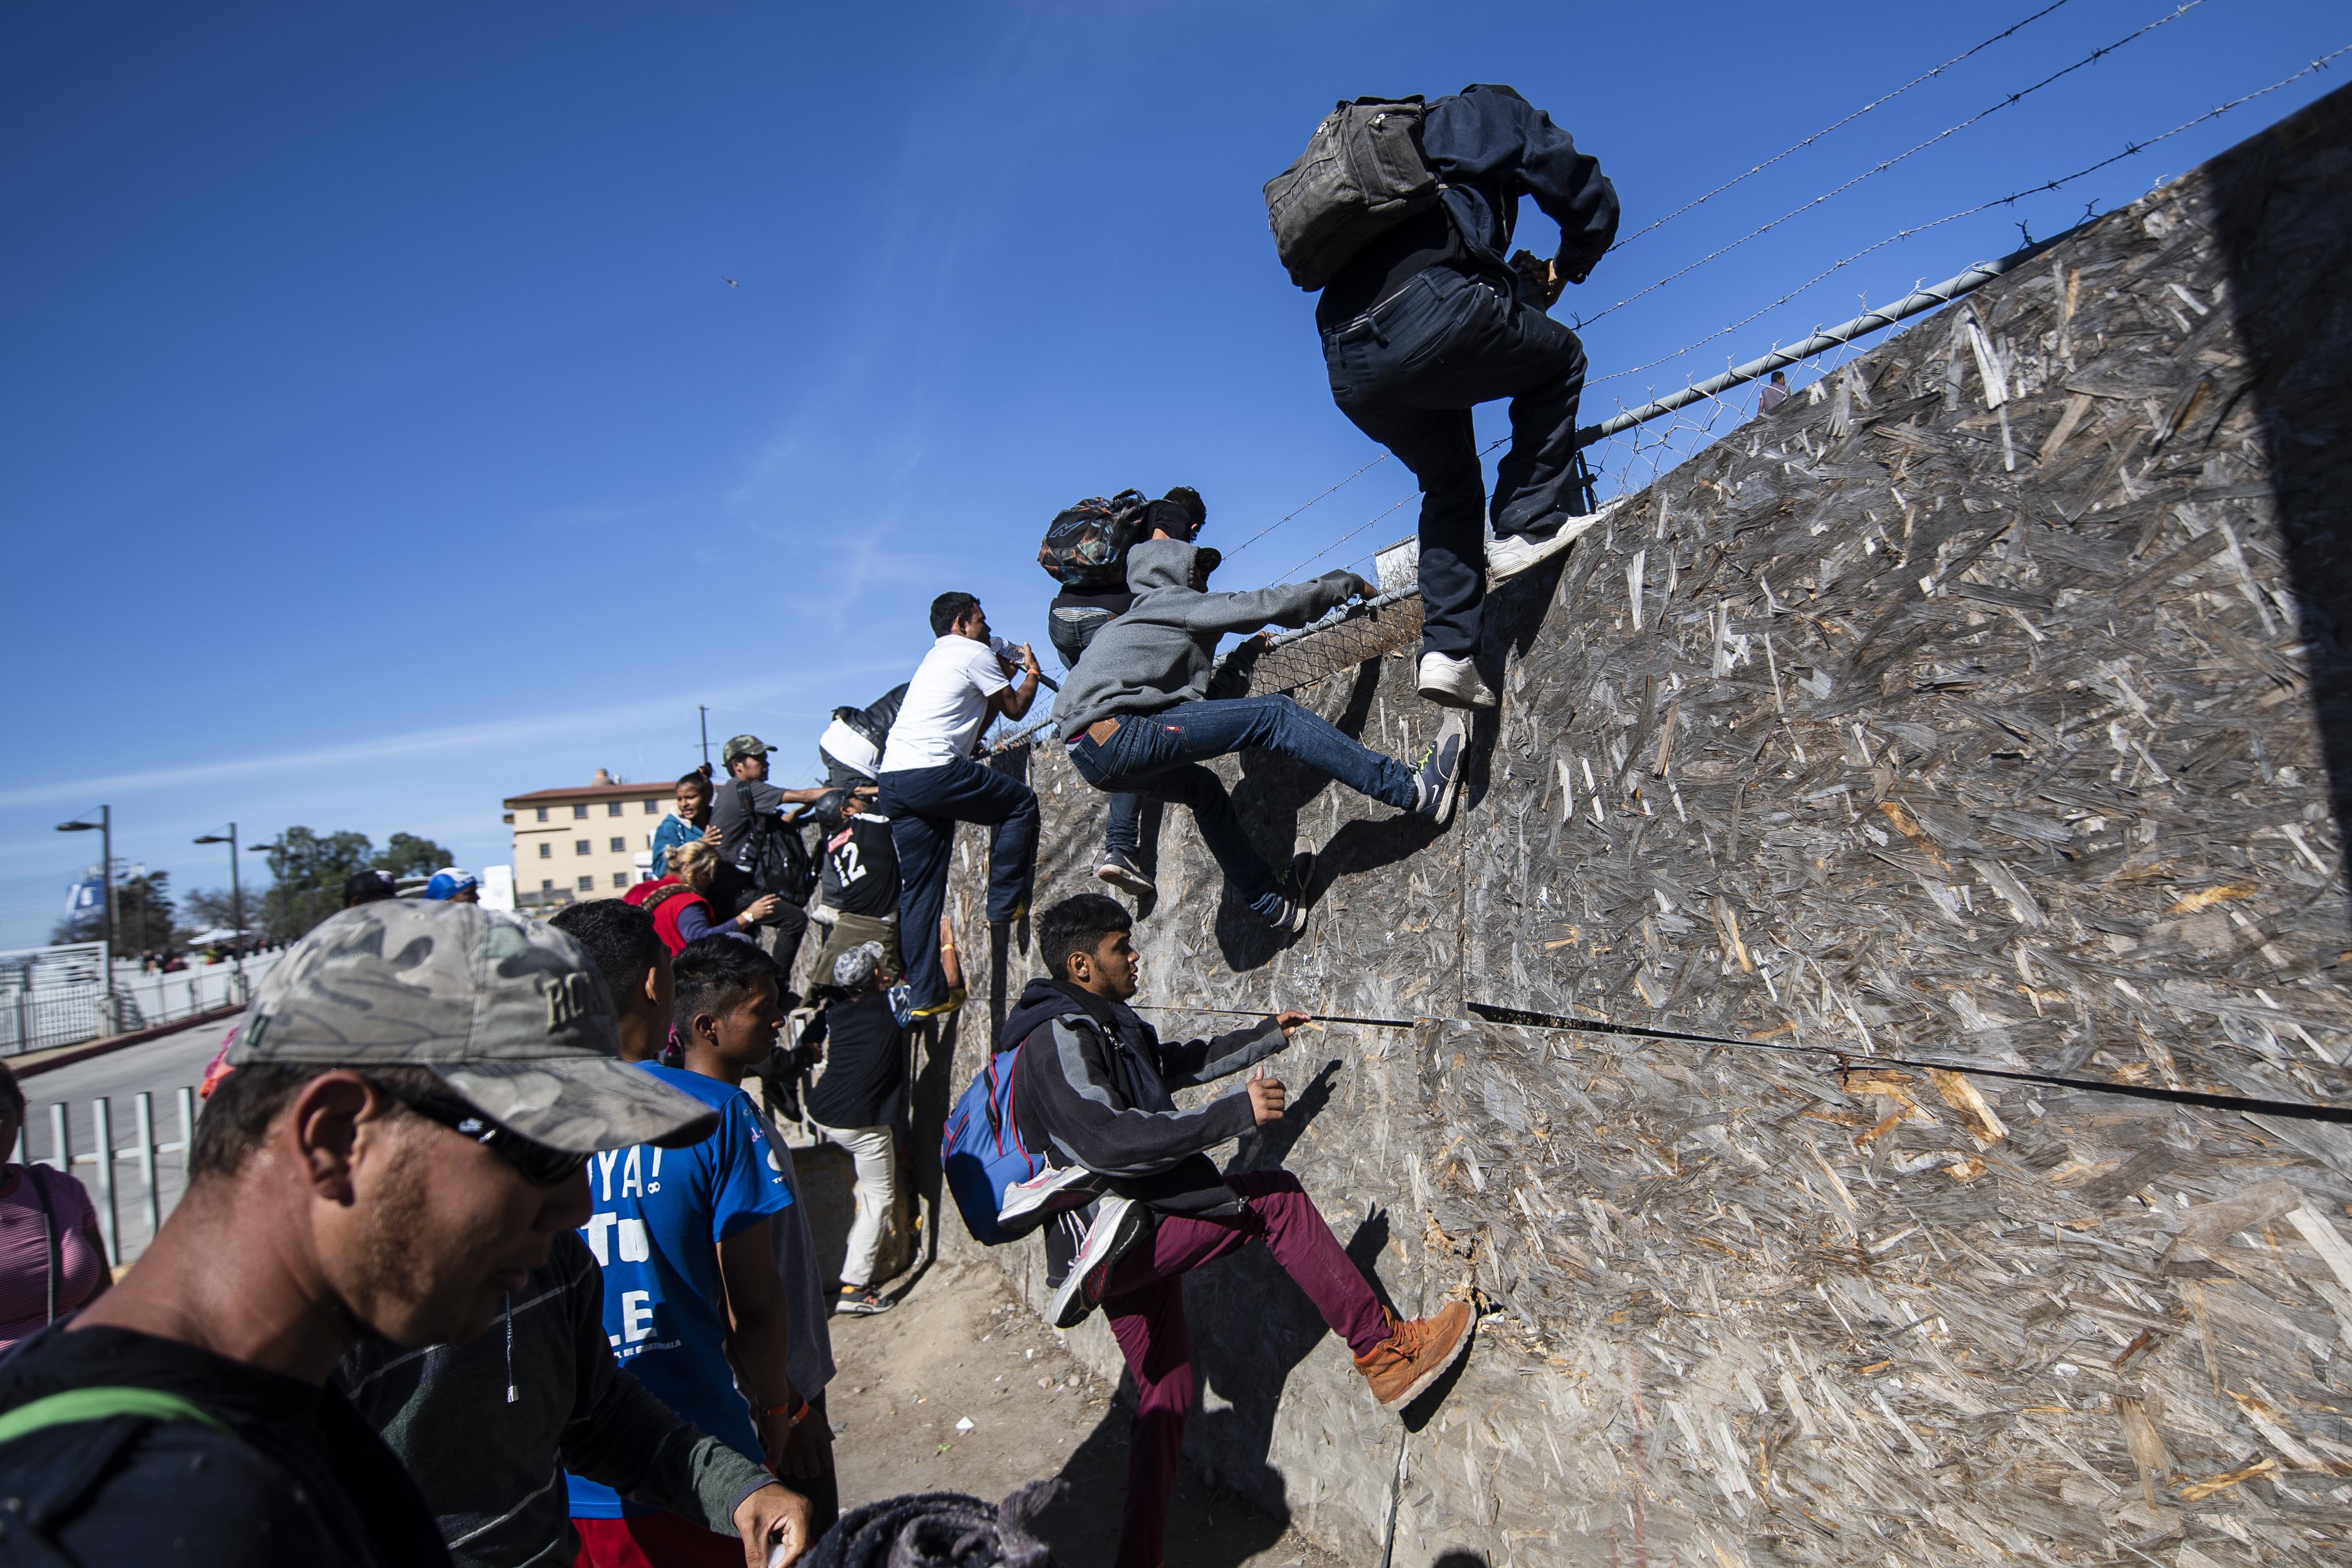 A group of Central American migrants -mostly from Honduras- get over a fence as they try to reach the US-Mexico border near the El Chaparral border crossing in Tijuana, Baja California State, Mexico, on November 25, 2018. - US officials closed the San Ysidro crossing point in southern California on Sunday after hundreds of migrants, part of the "caravan" condemned by President Donald Trump, tried to breach a fence from Tijuana, authorities announced. (Photo by Pedro PARDO / AFP) (Photo credit should read PEDRO PARDO/AFP/Getty Images)